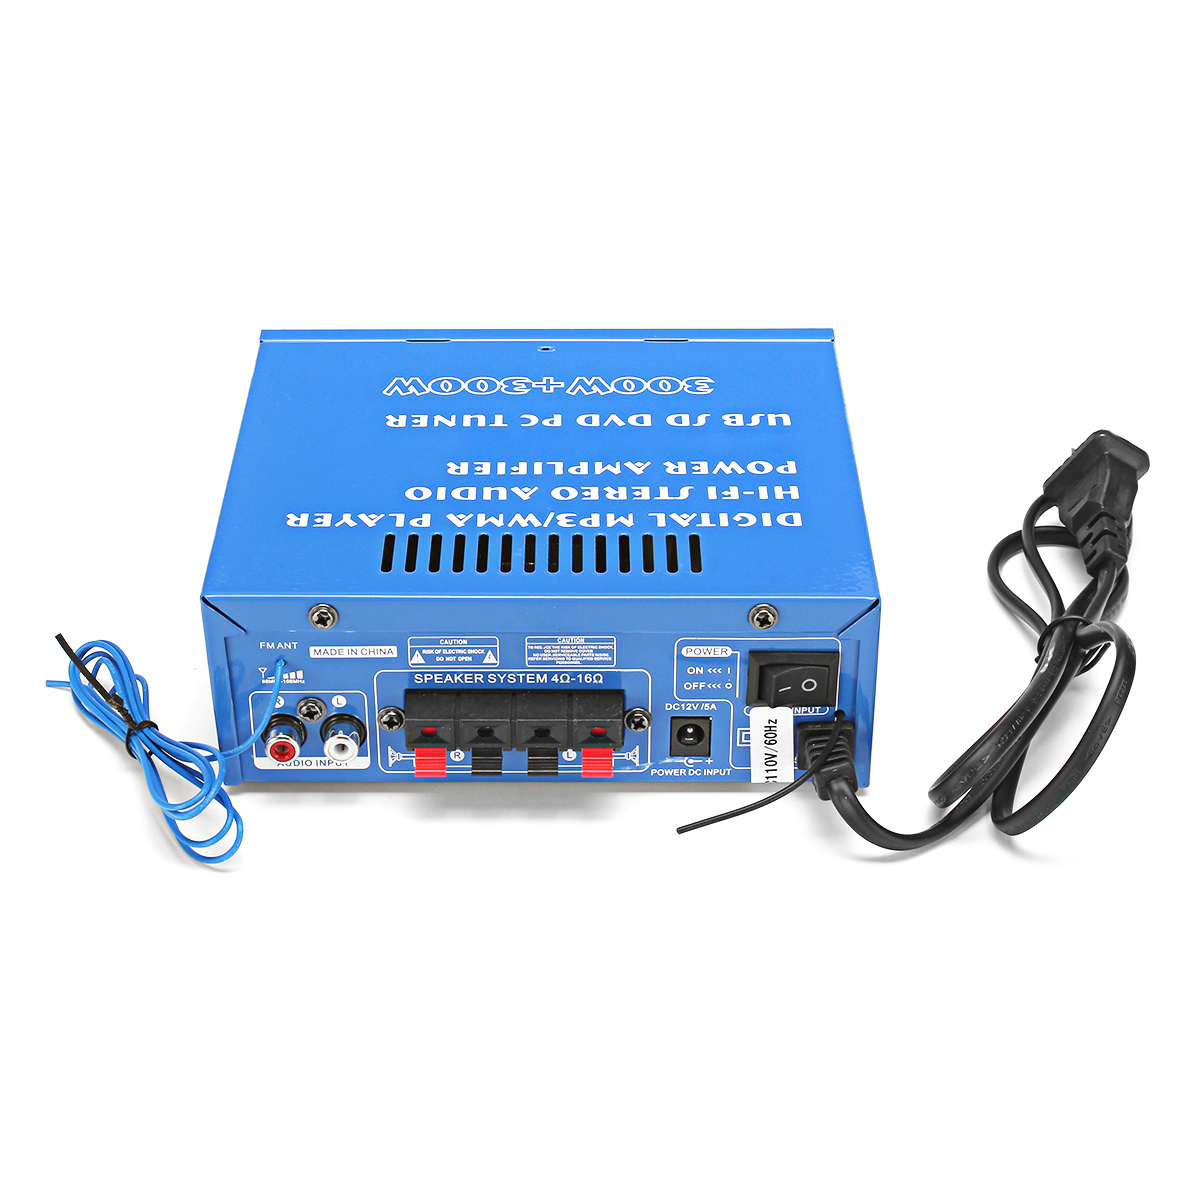 HIFI Bluetooth Audio Power Amplifier AMP Supporyt FM Radio SD Card USB Microphone Input 300Wx2 12V 110V for Car Home